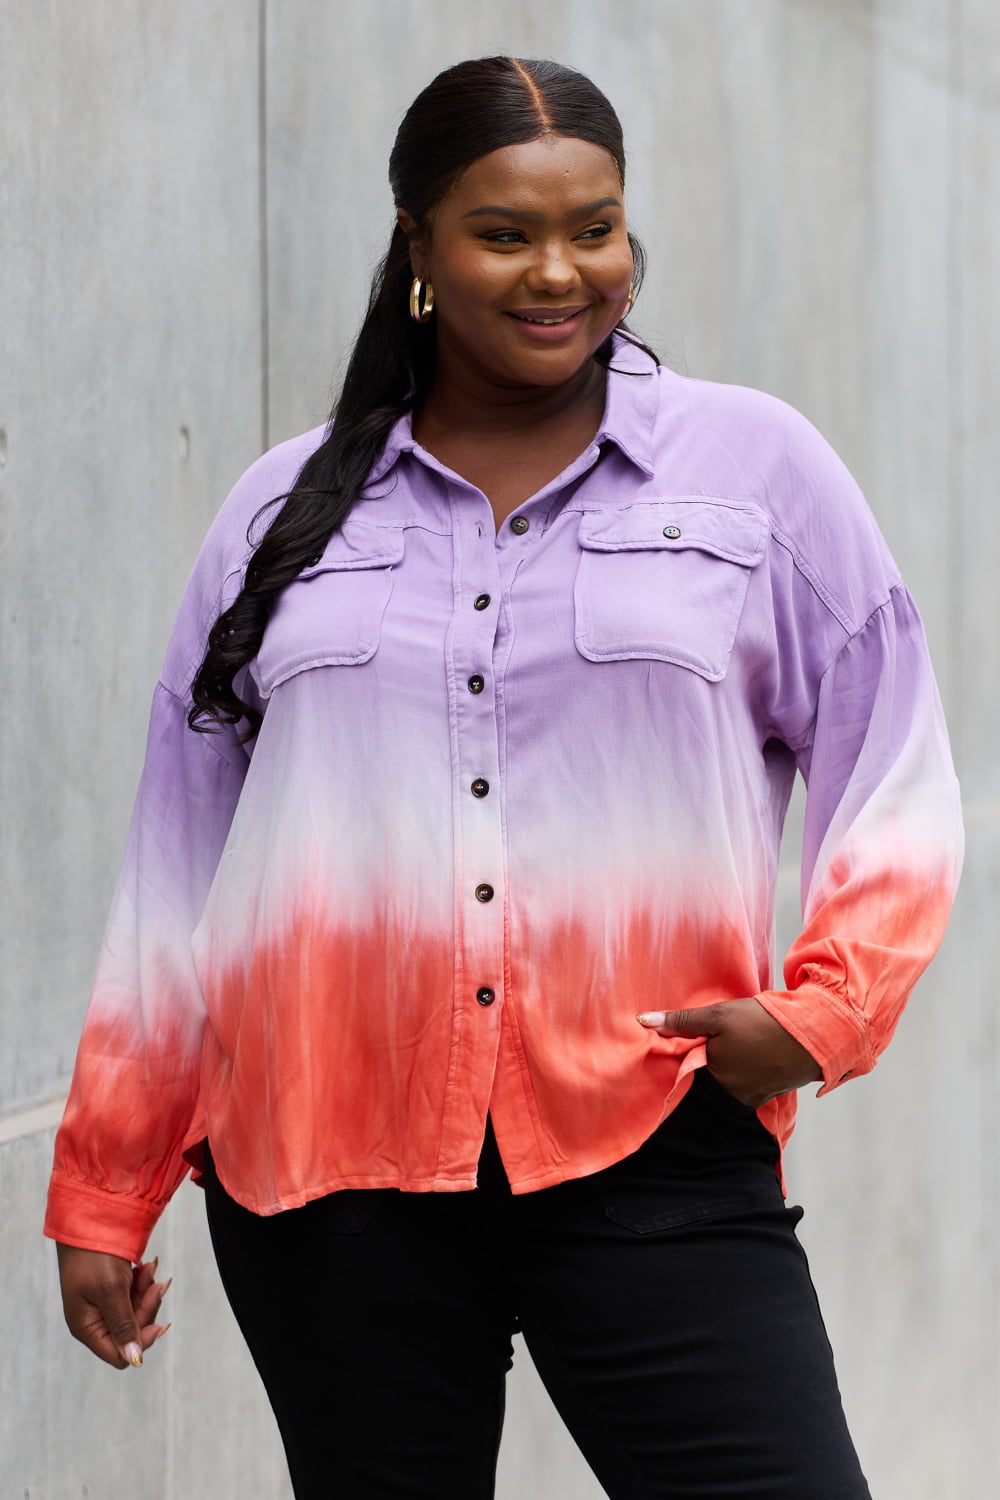 Relaxed Fit Tie-Dye Button Down Top